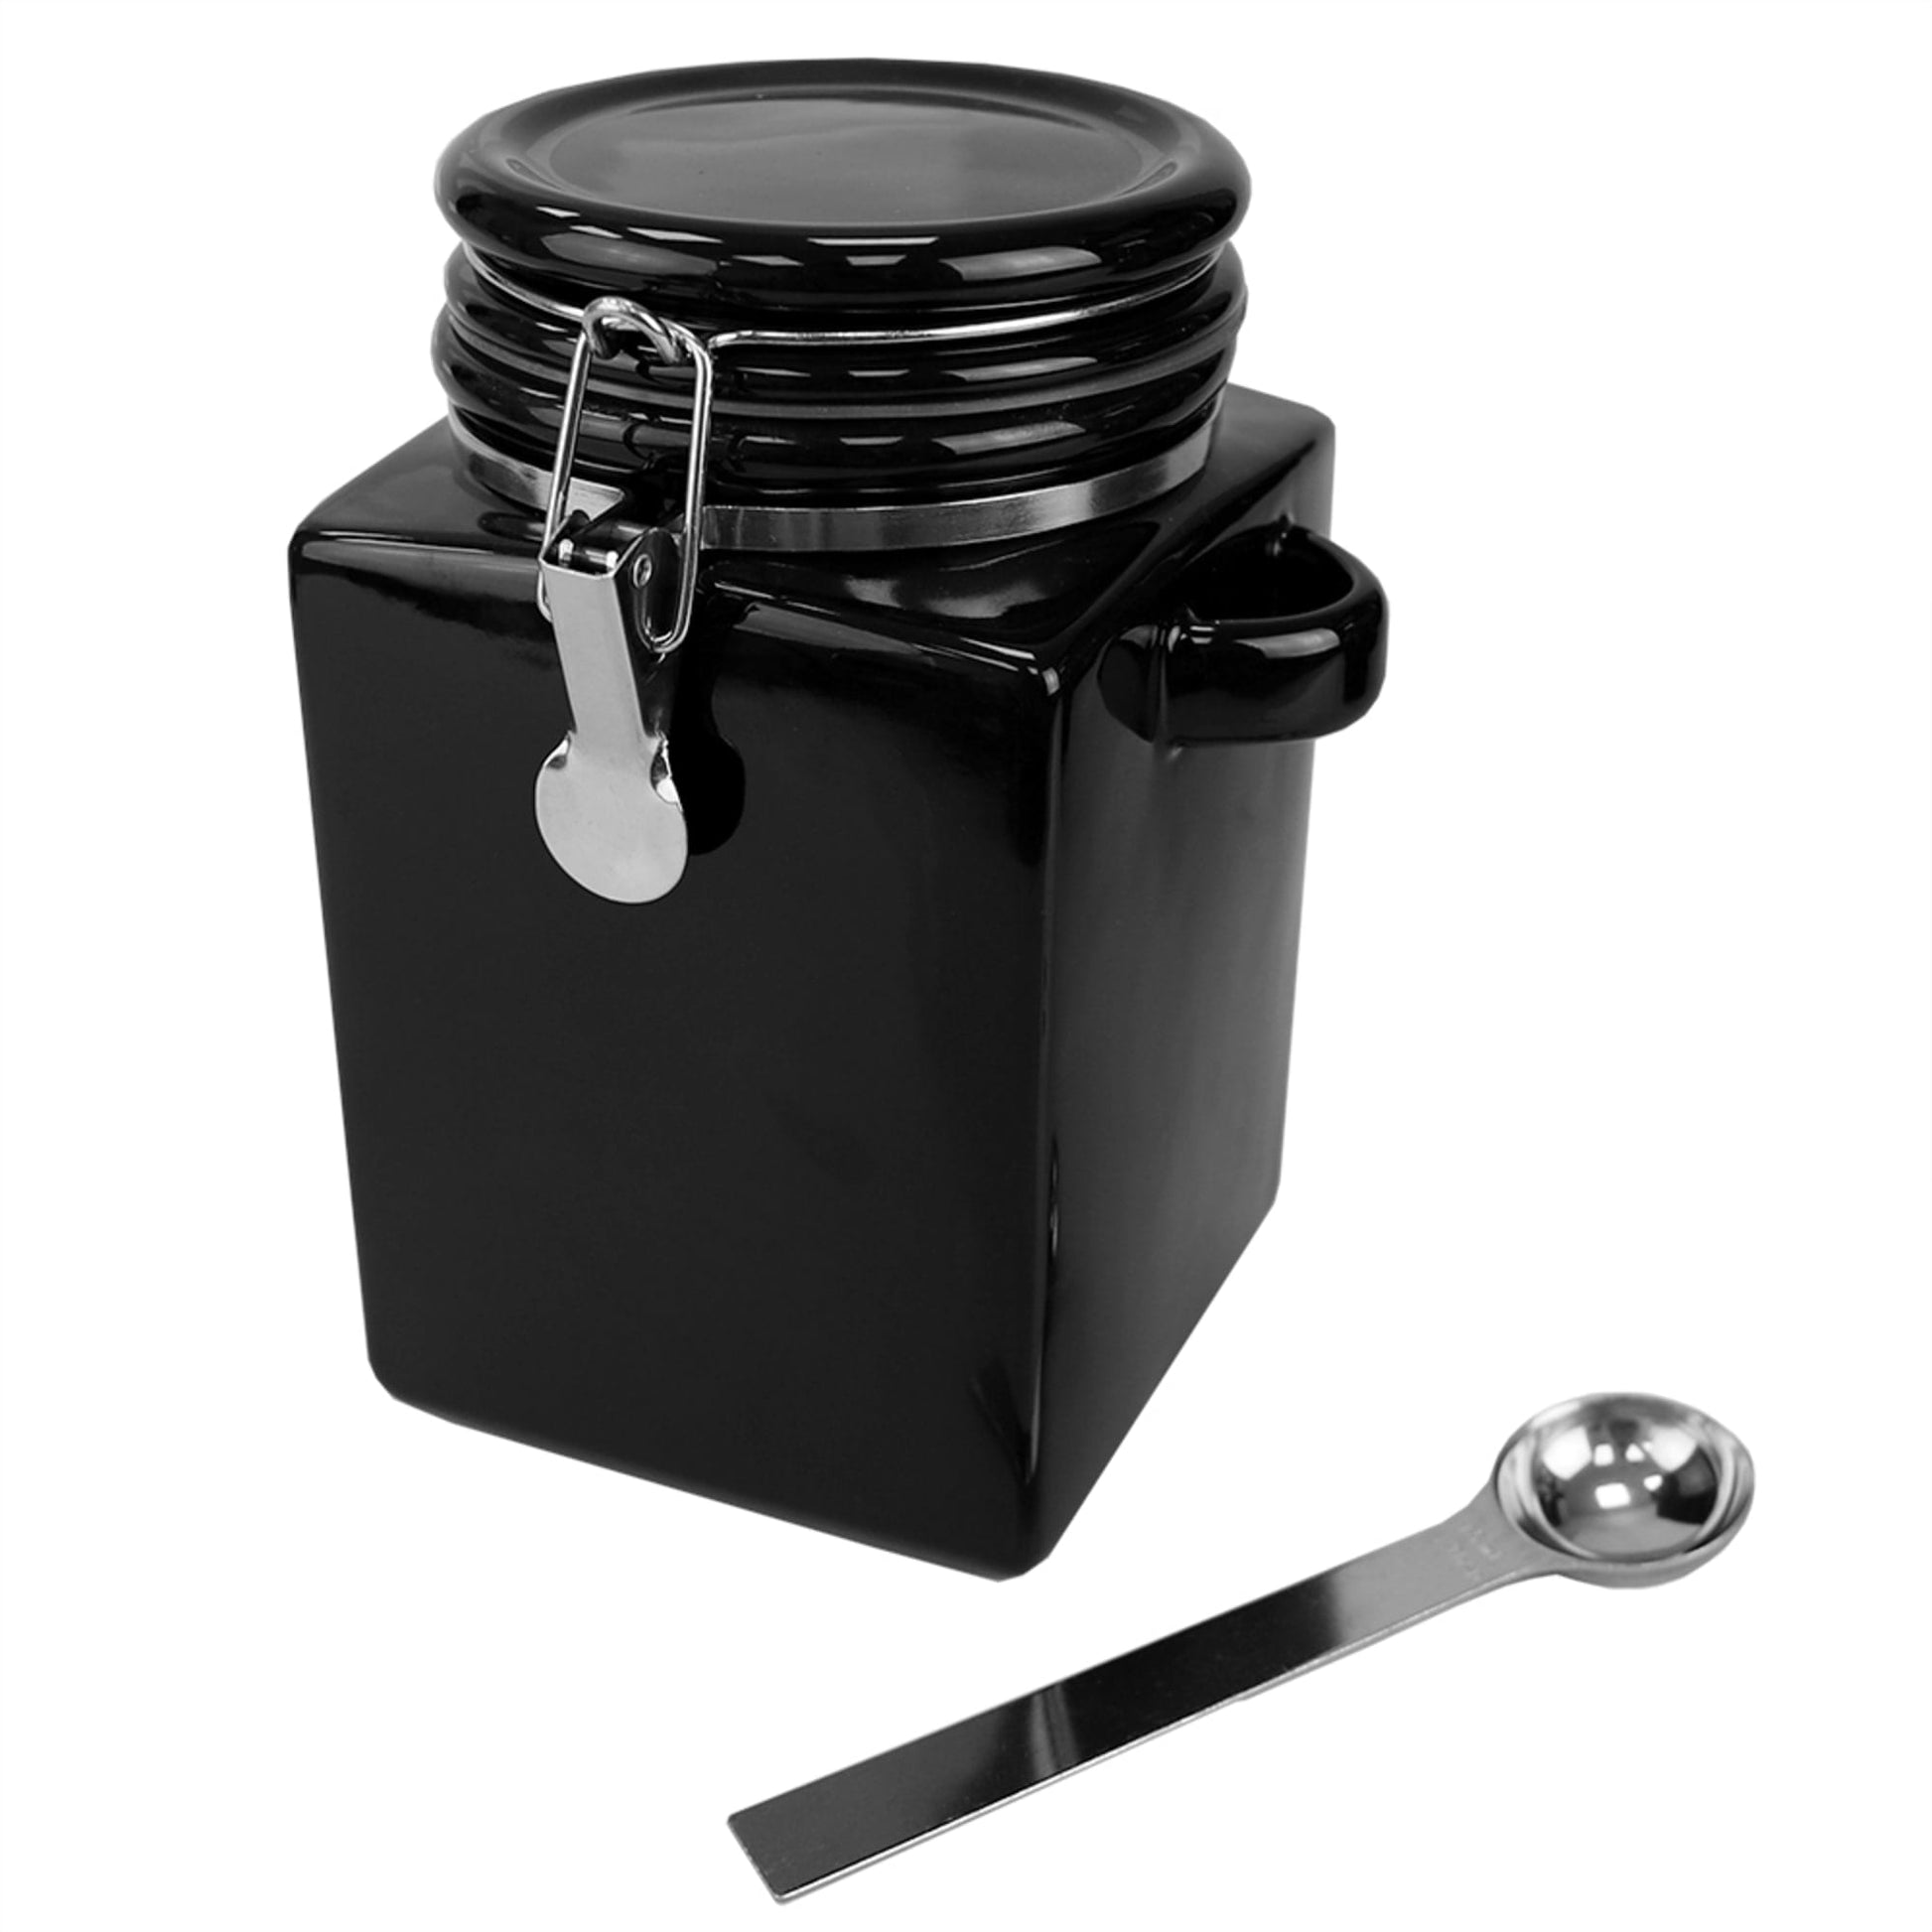 Home Basics 4-Piece Black Ceramic Canister Set with Wooden Spoons HDC59633  - The Home Depot